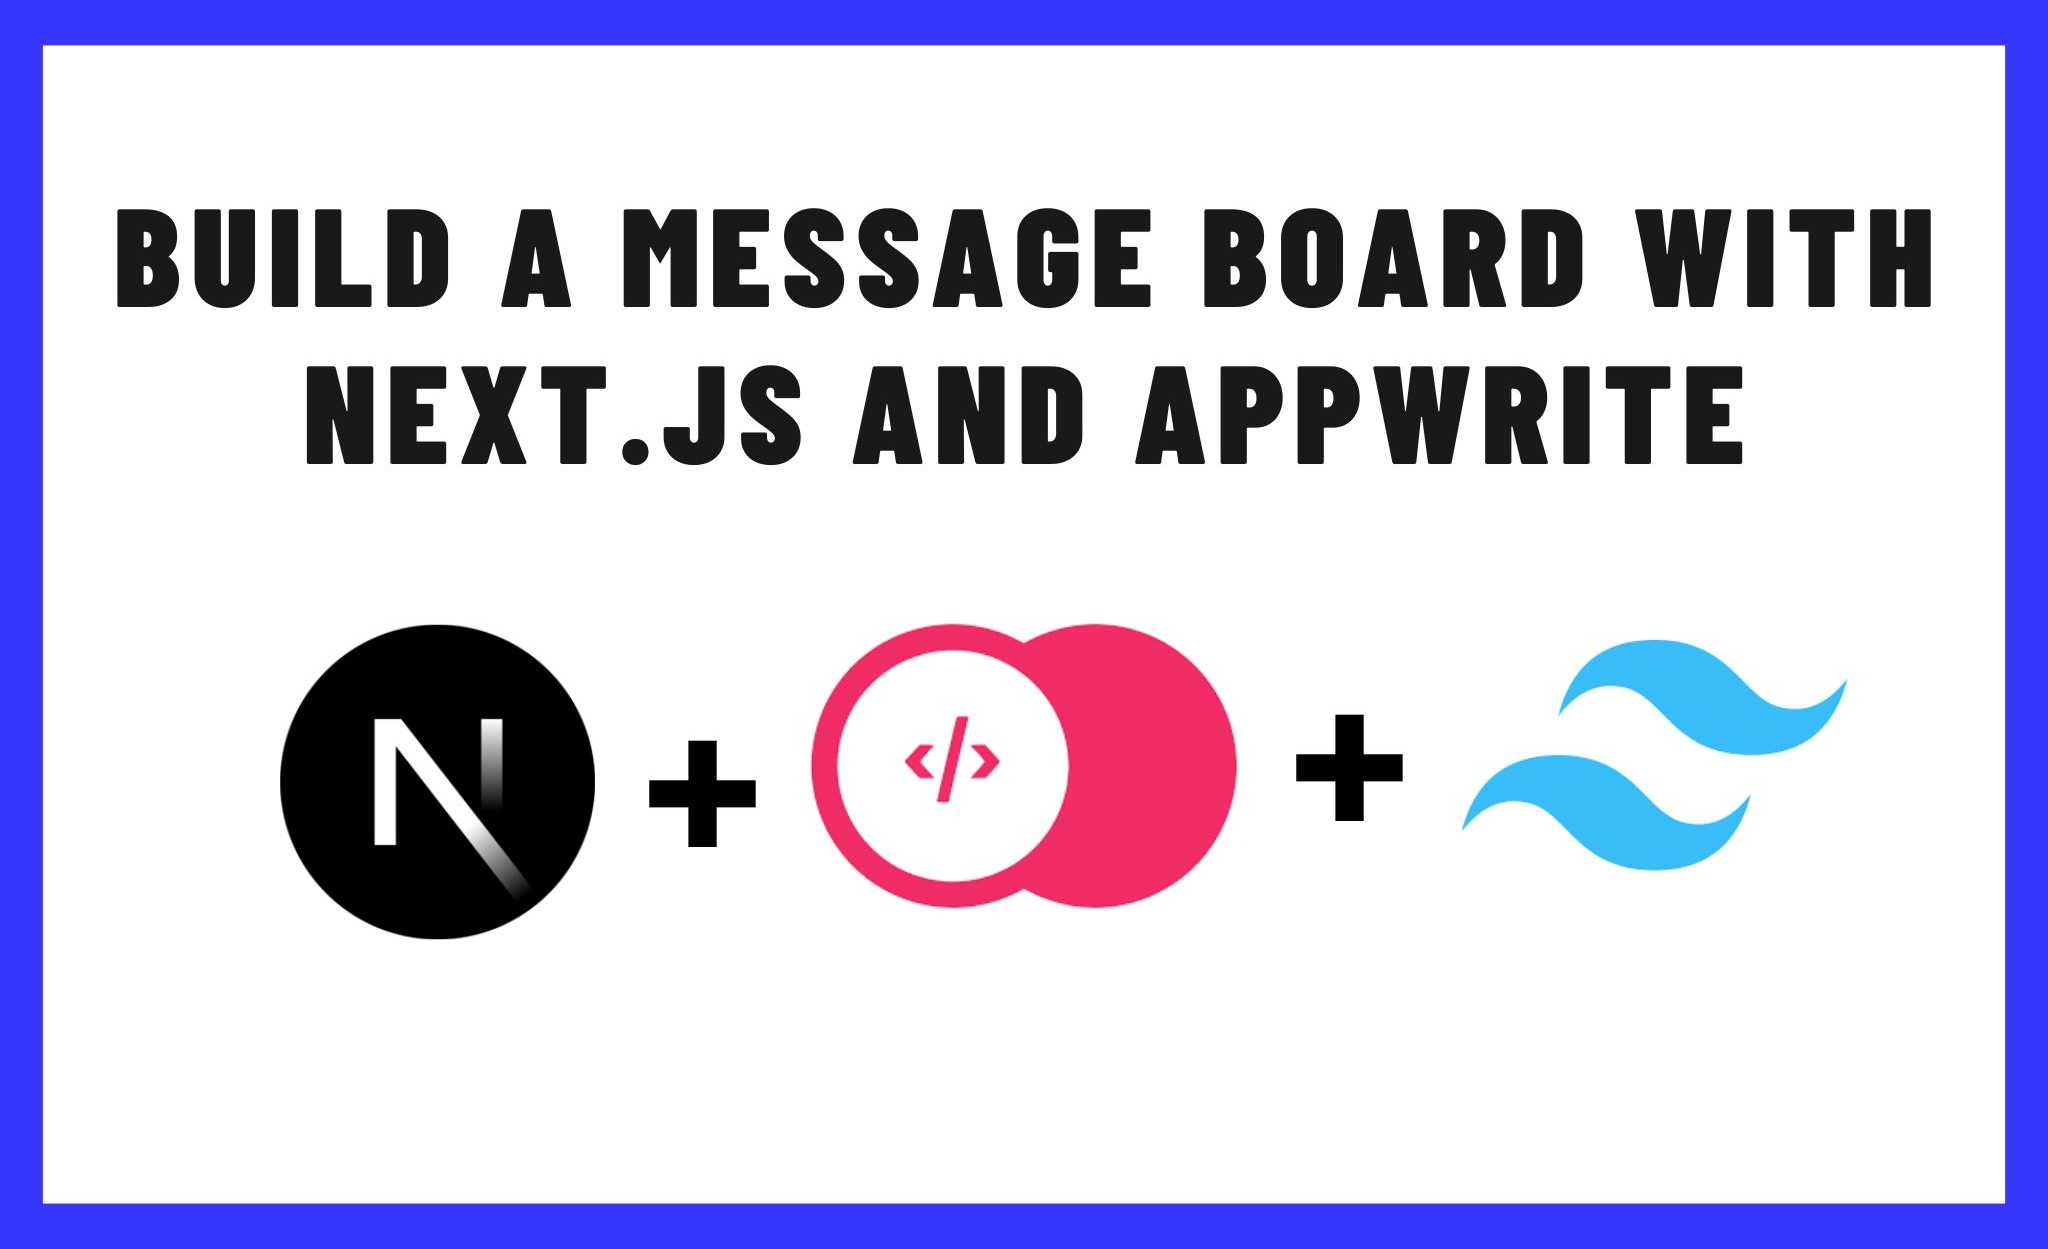 Building a message board with Next.js and AppWrite